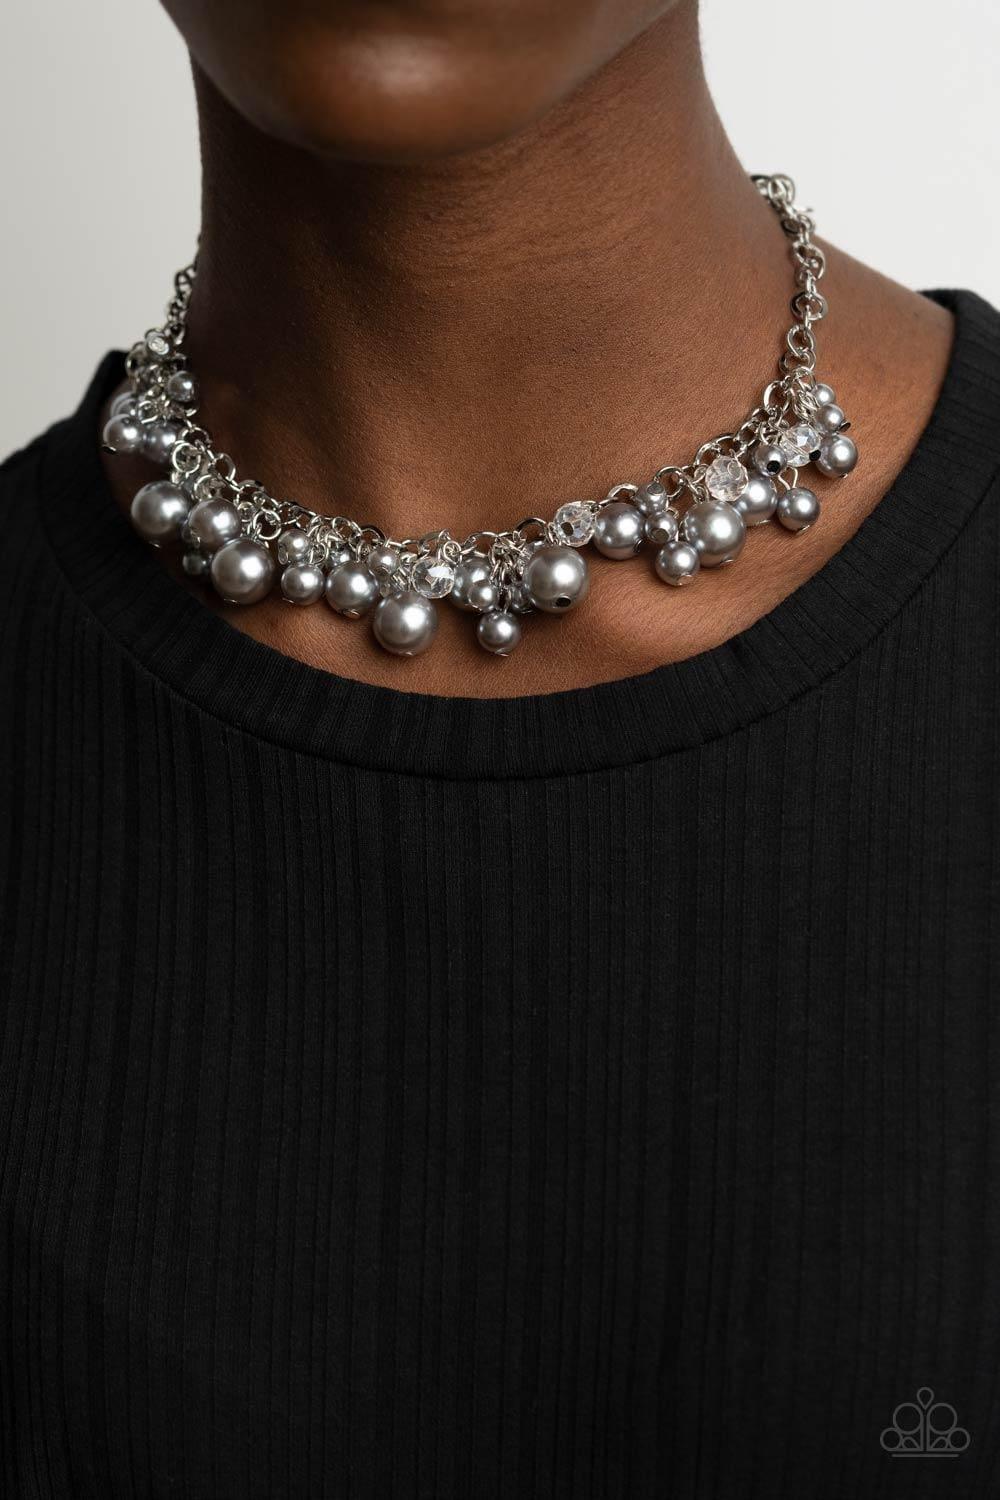 Paparazzi Accessories - Positively Pearl-escent - Silver Necklace - Bling by JessieK